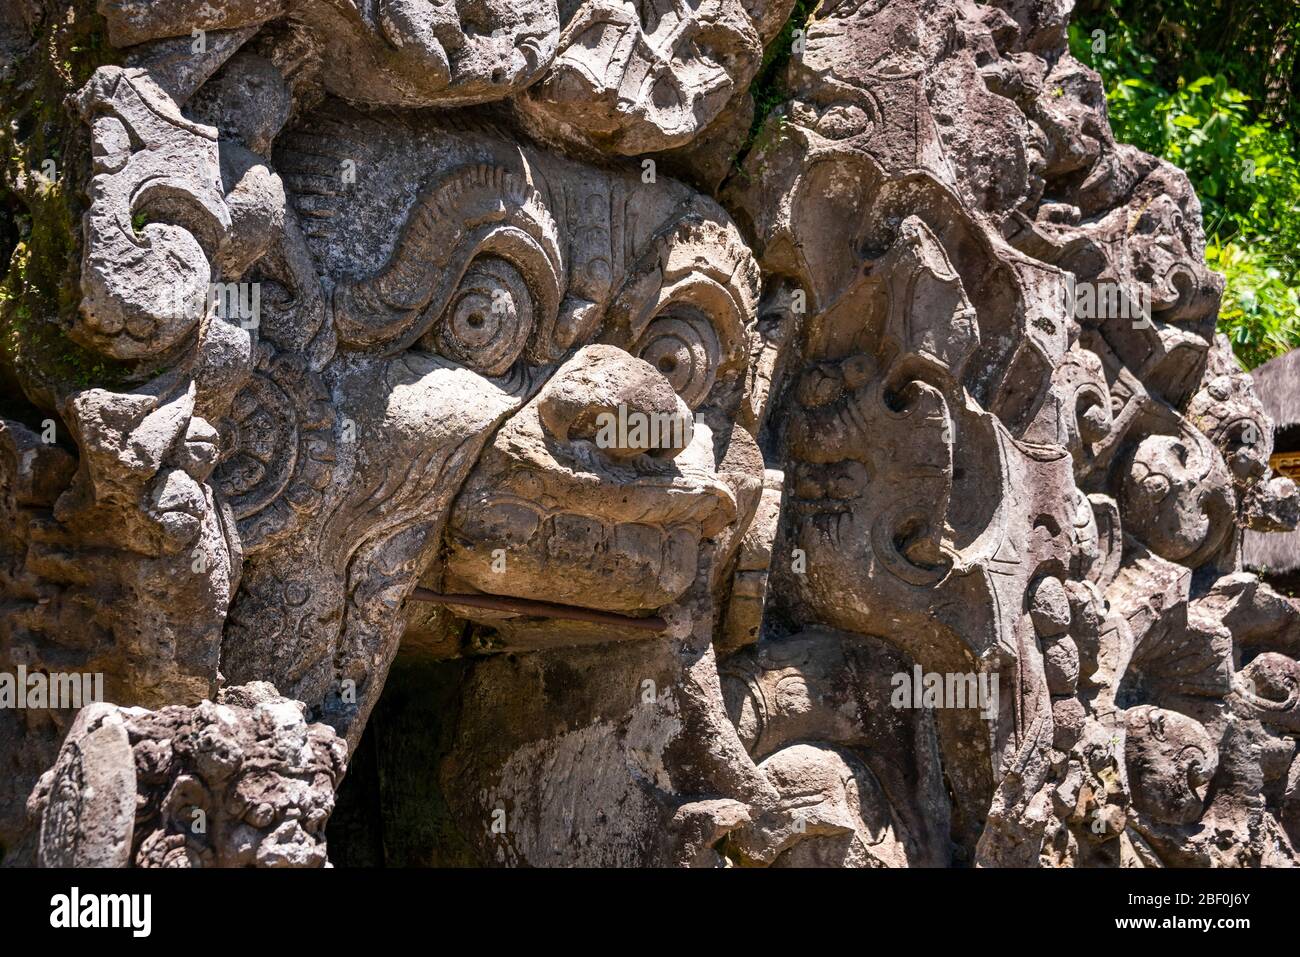 Horizontal close up view of the Elephant cave in Bali, Indonesia. Stock Photo